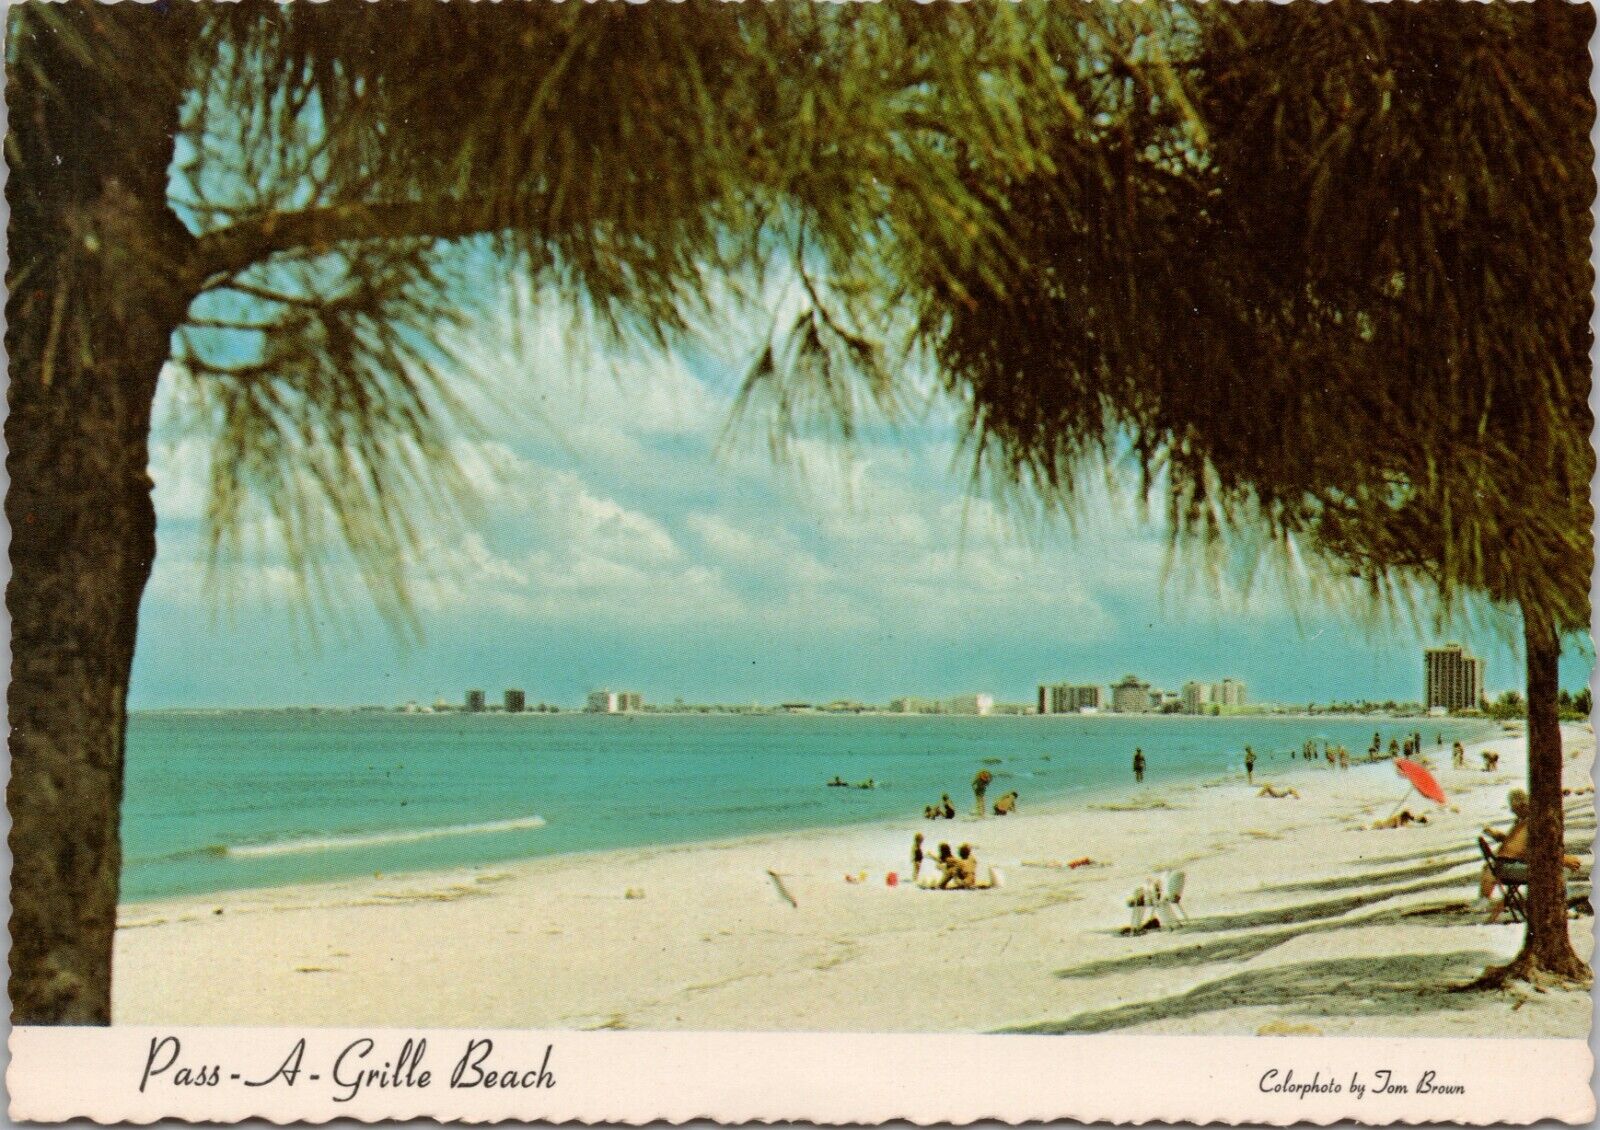 PASS - A - GRILLE BEACH, FLORIDA ~ Looking North Towards St. Petersburg Beach